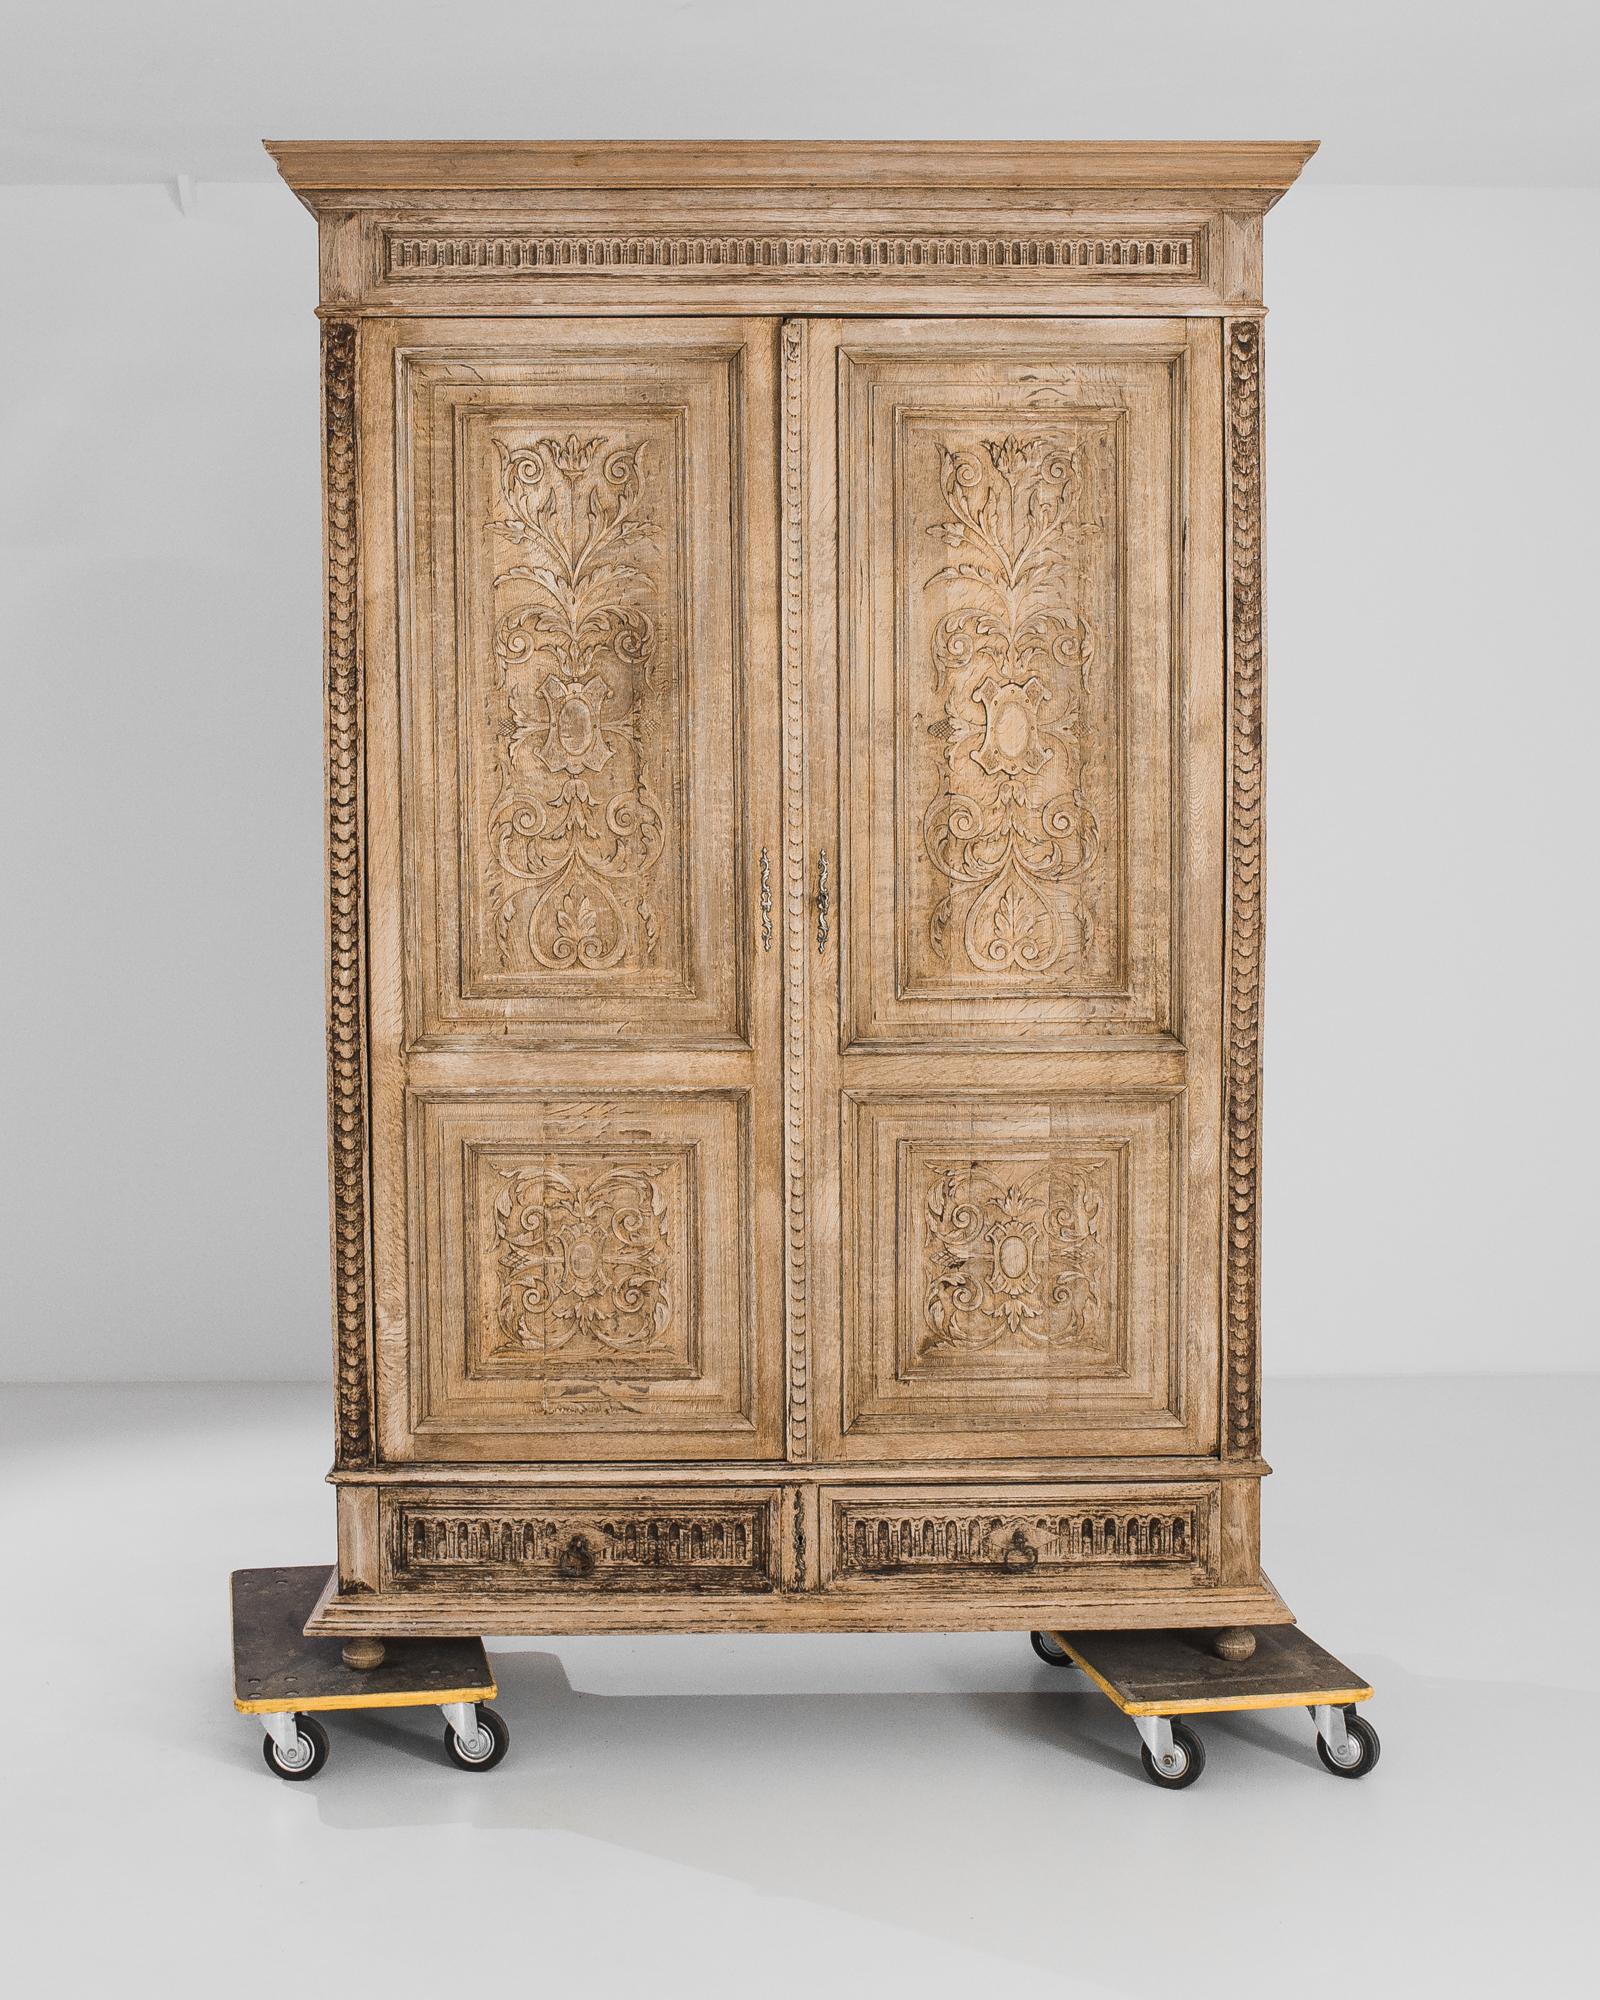 Stepping into the refined interiors of late 19th-century Belgium, this bleached oak armoire from the 1880s stands as a testament to the elegance and craftsmanship of the era. Crafted with meticulous attention to detail, this piece embodies the